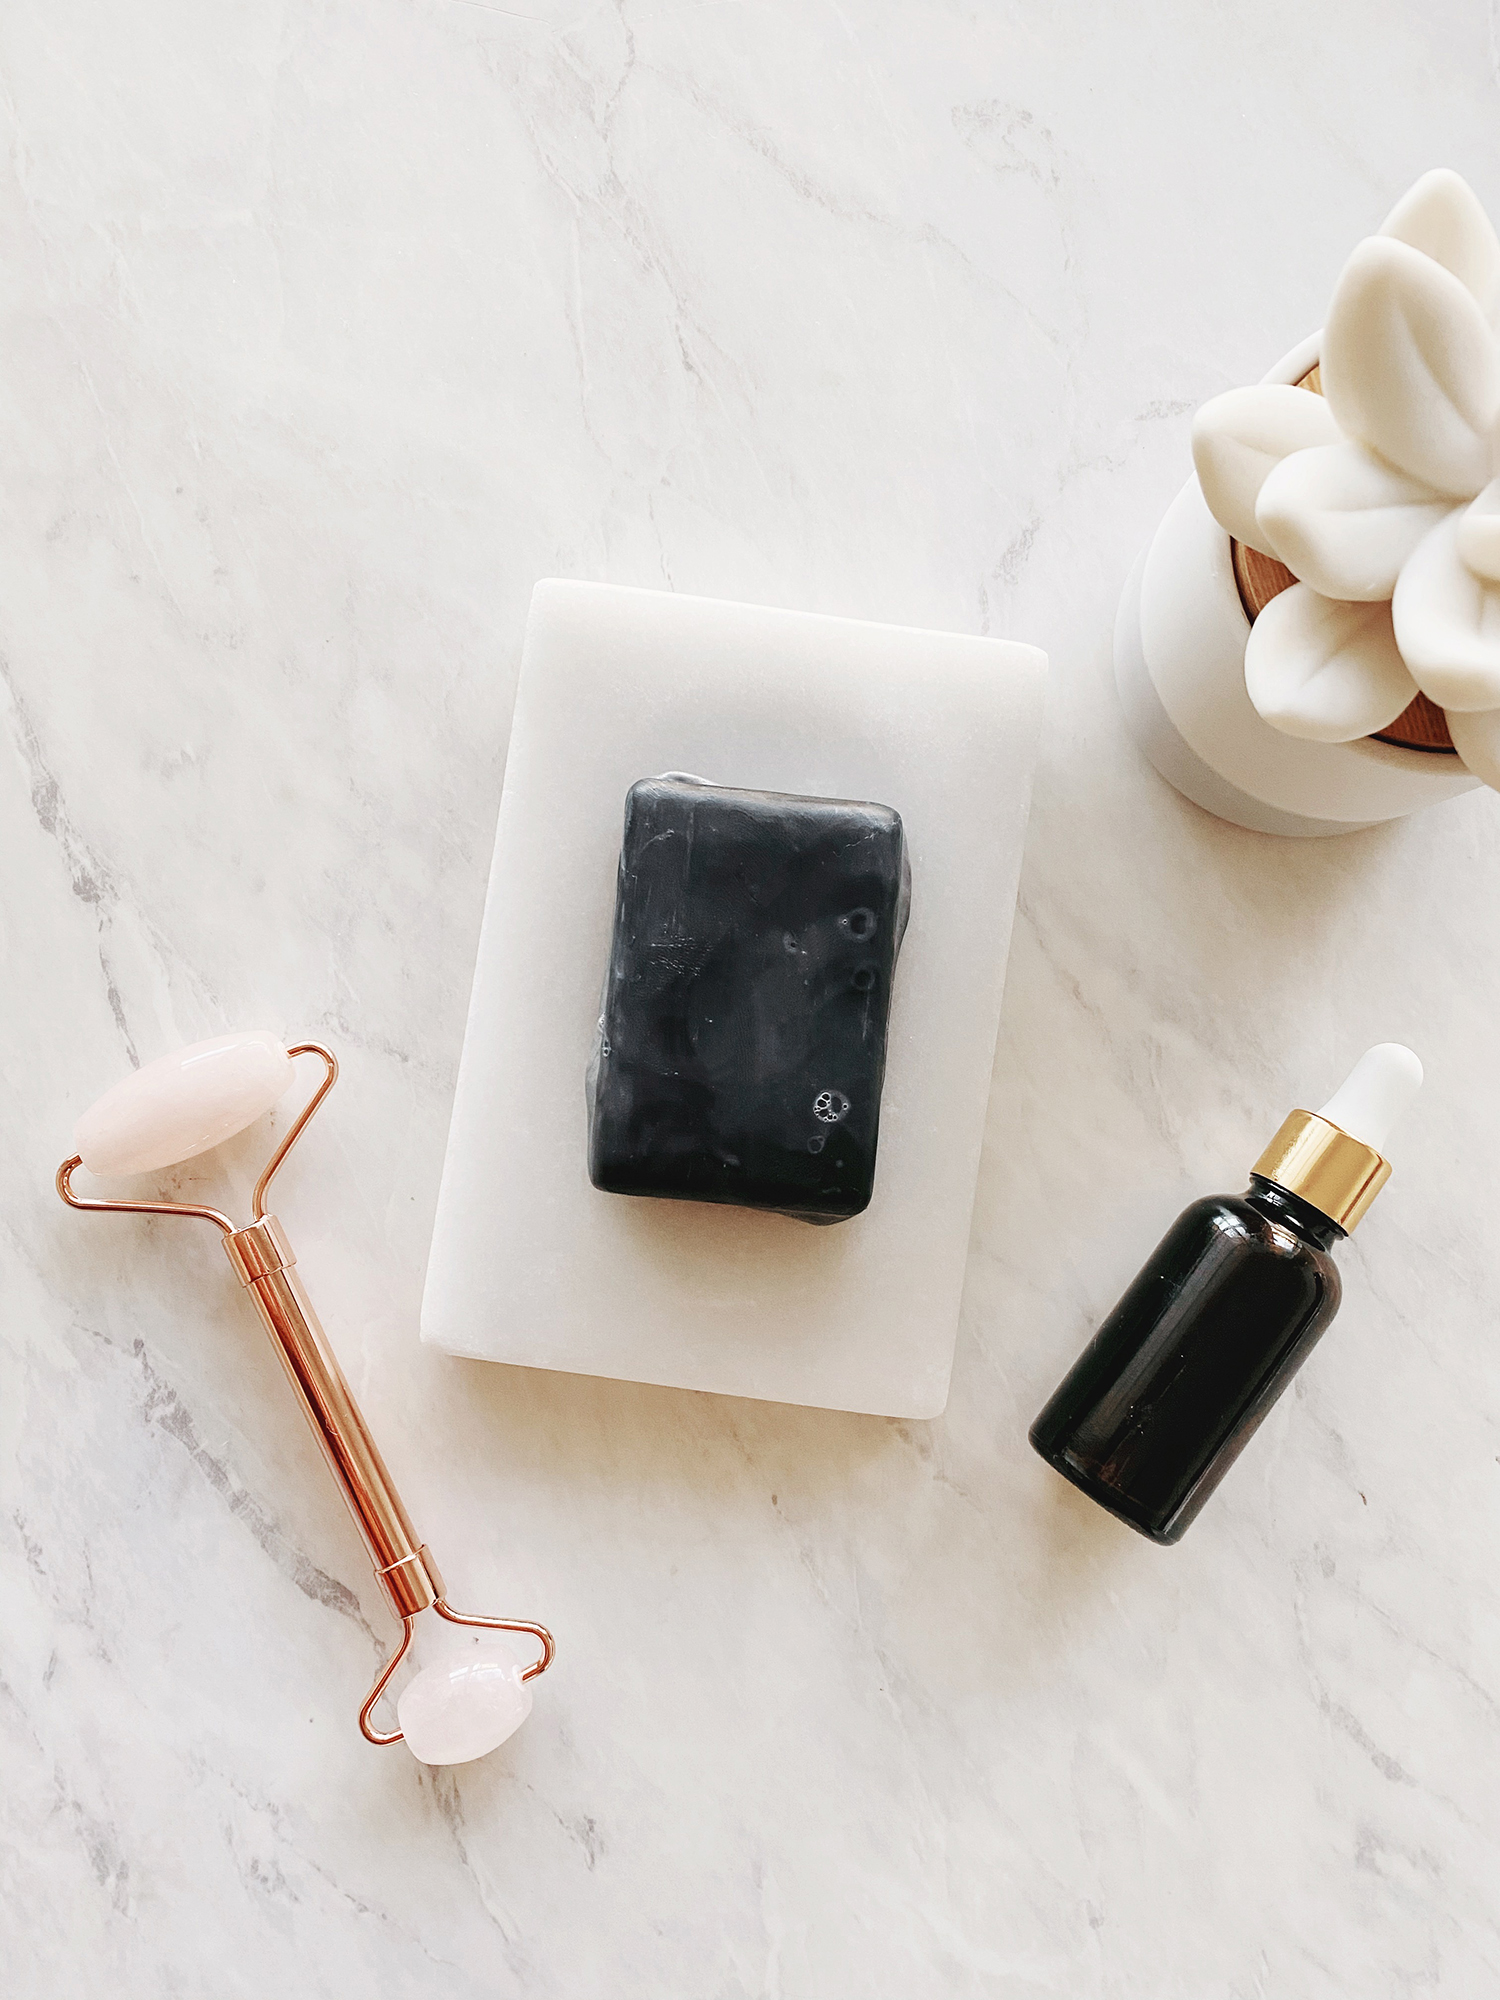 My skin has transformed with the help of charcoal and clean skincare products. On the blog, I am sharing the top five benefits of charcoal for you to enjoy healthier skin. Dive into another edition of Wellness Wednesdays and read more on KaraLayne.com!